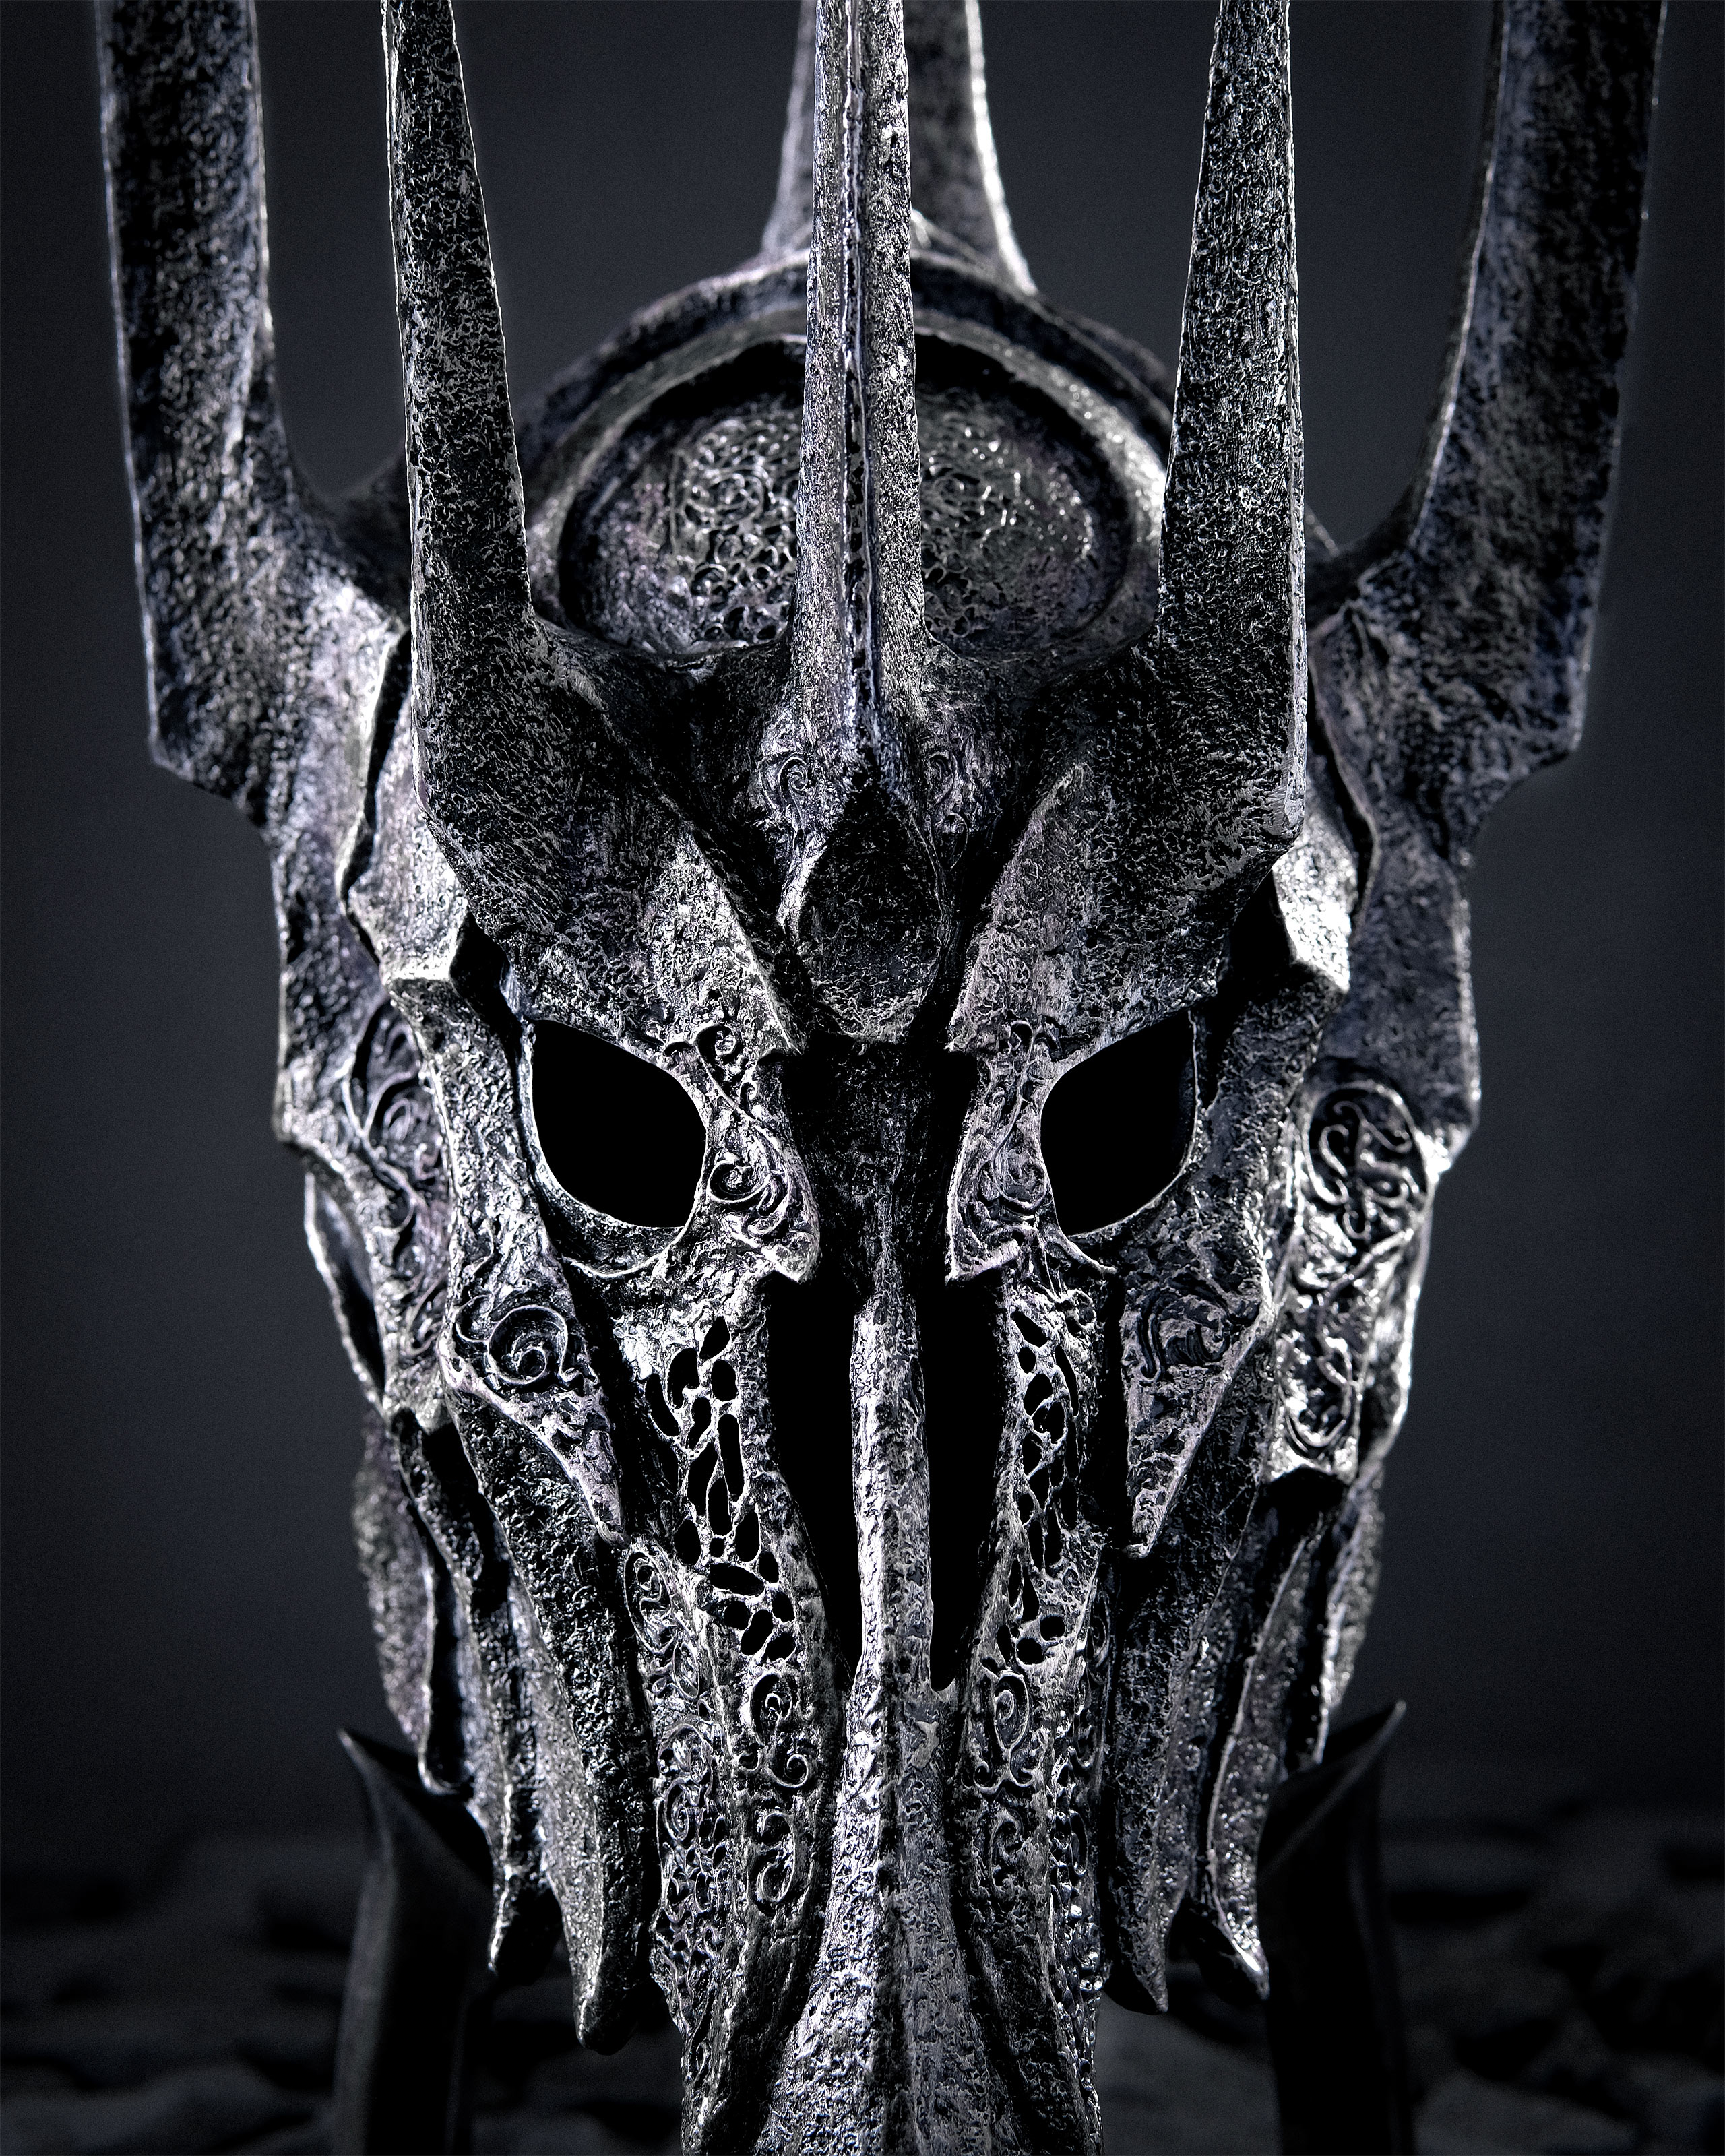 Sauron's Helmet Replica - Lord of the Rings